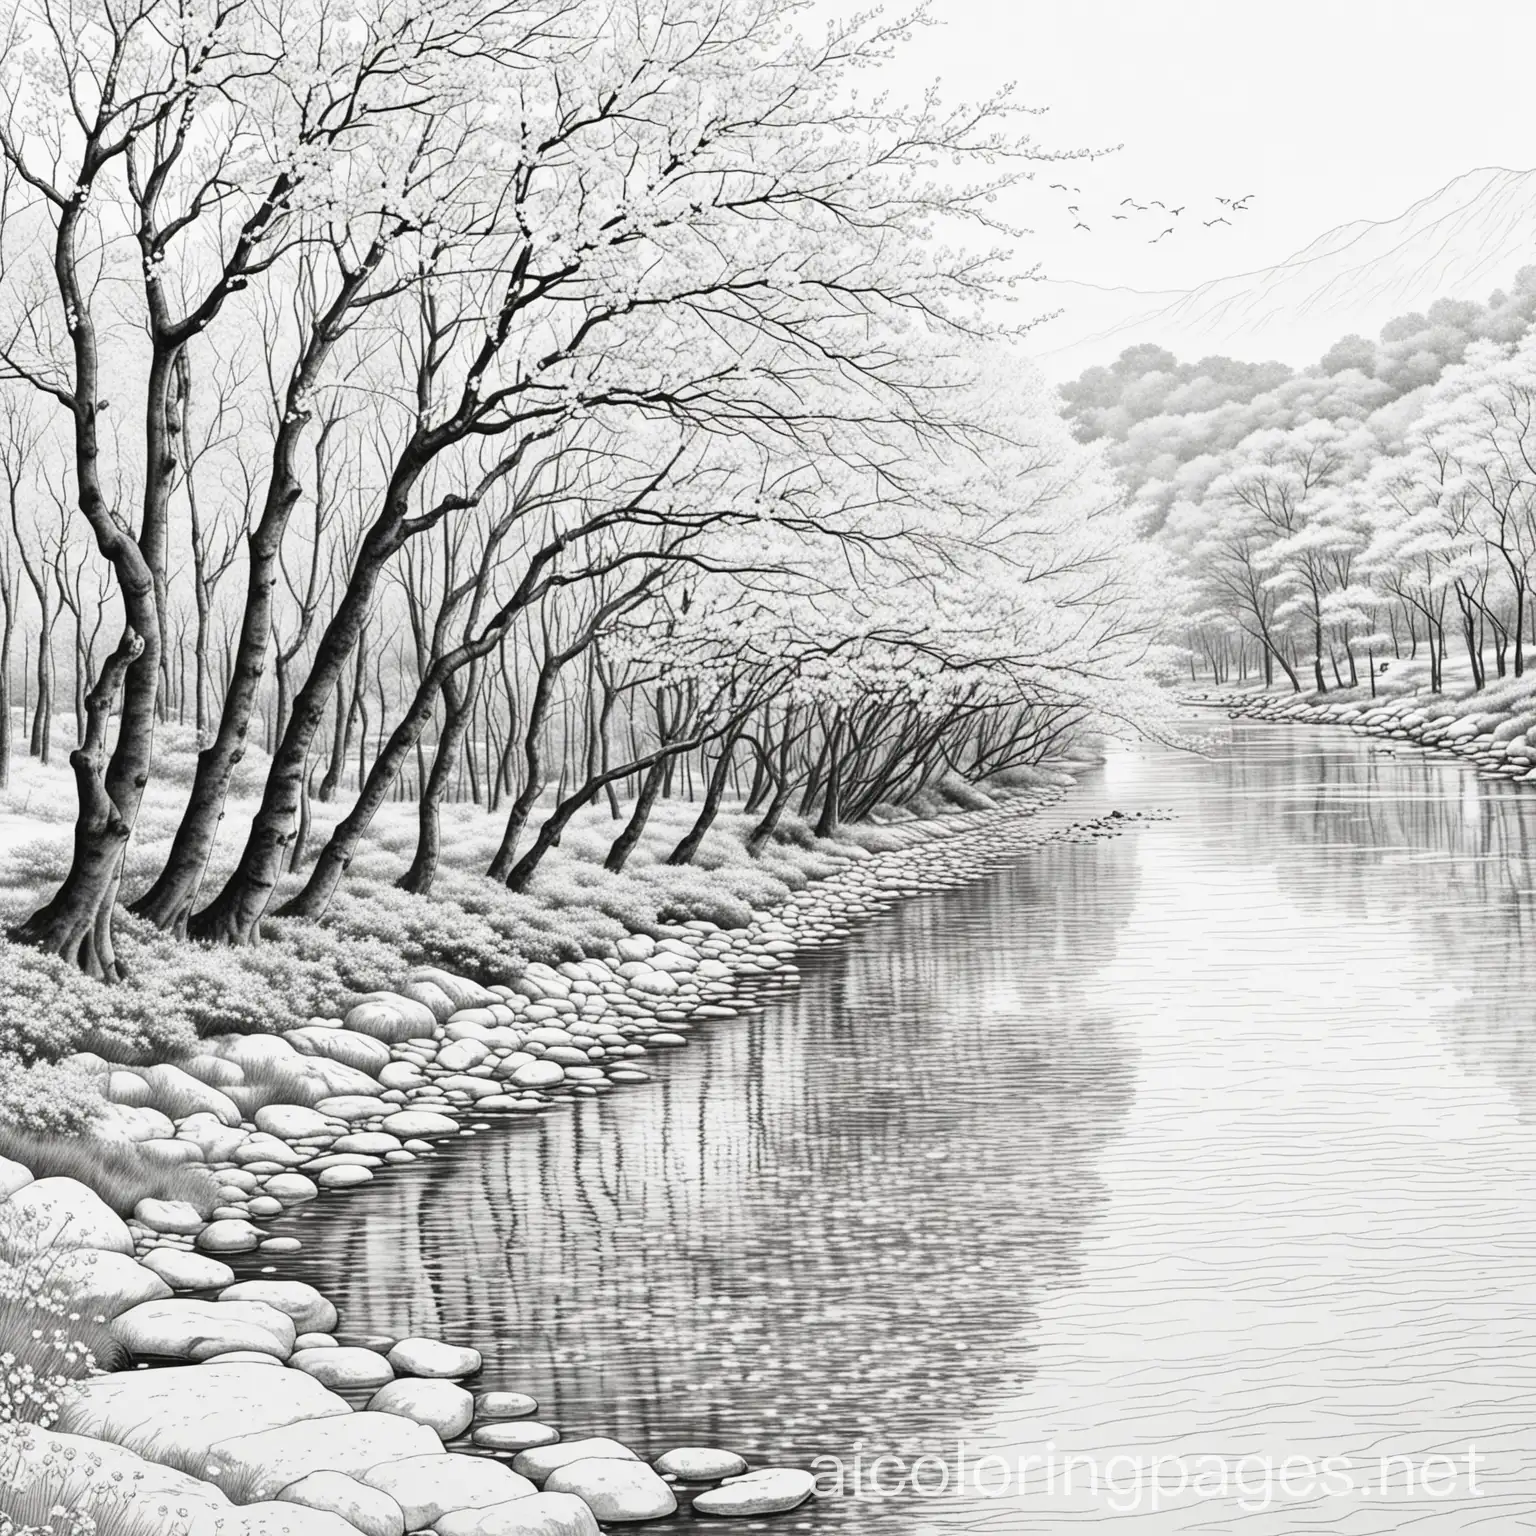 Coloring Page of Sakura Trees Along the River, black and white, line art, white background, Simplicity, Ample White Space. The background of the coloring page is plain white to make it easy for young children to color within the lines. The outlines of all the subjects are easy to distinguish, making it simple for kids to color without too much difficulty